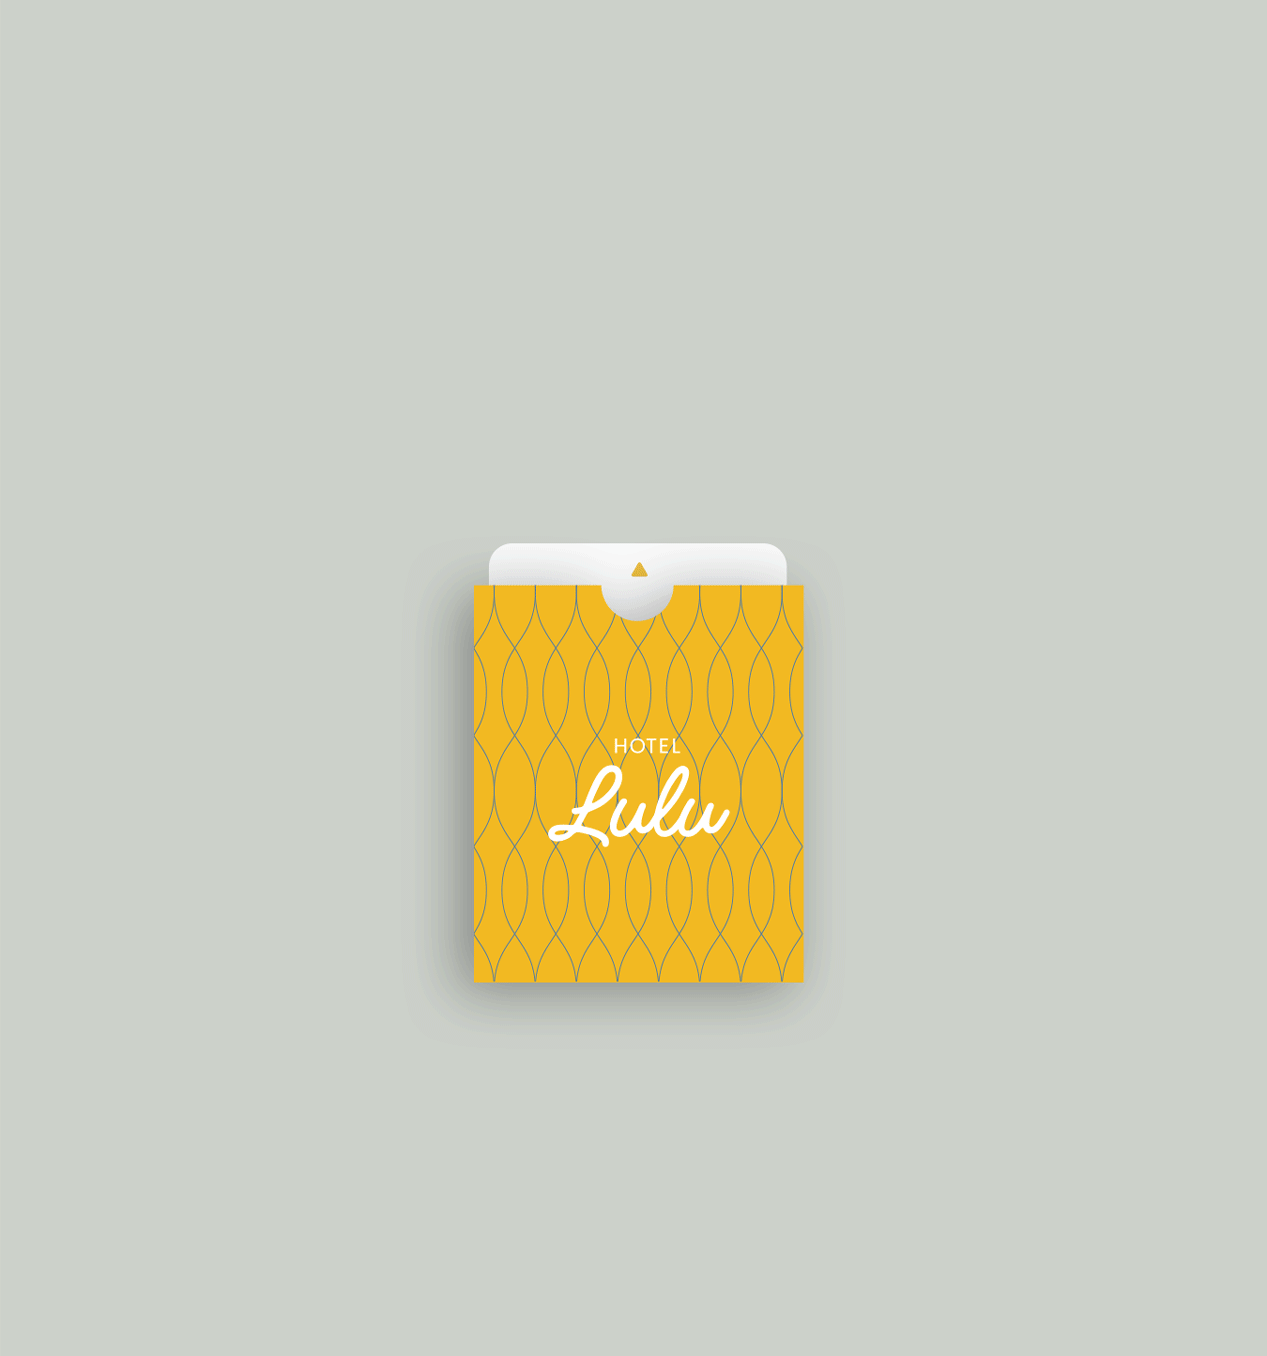 A hotel room key card for Hotel Lulu with a graphic of a woman in a bathing suit lounging under palm trees, set against a yellow geometric pattern.